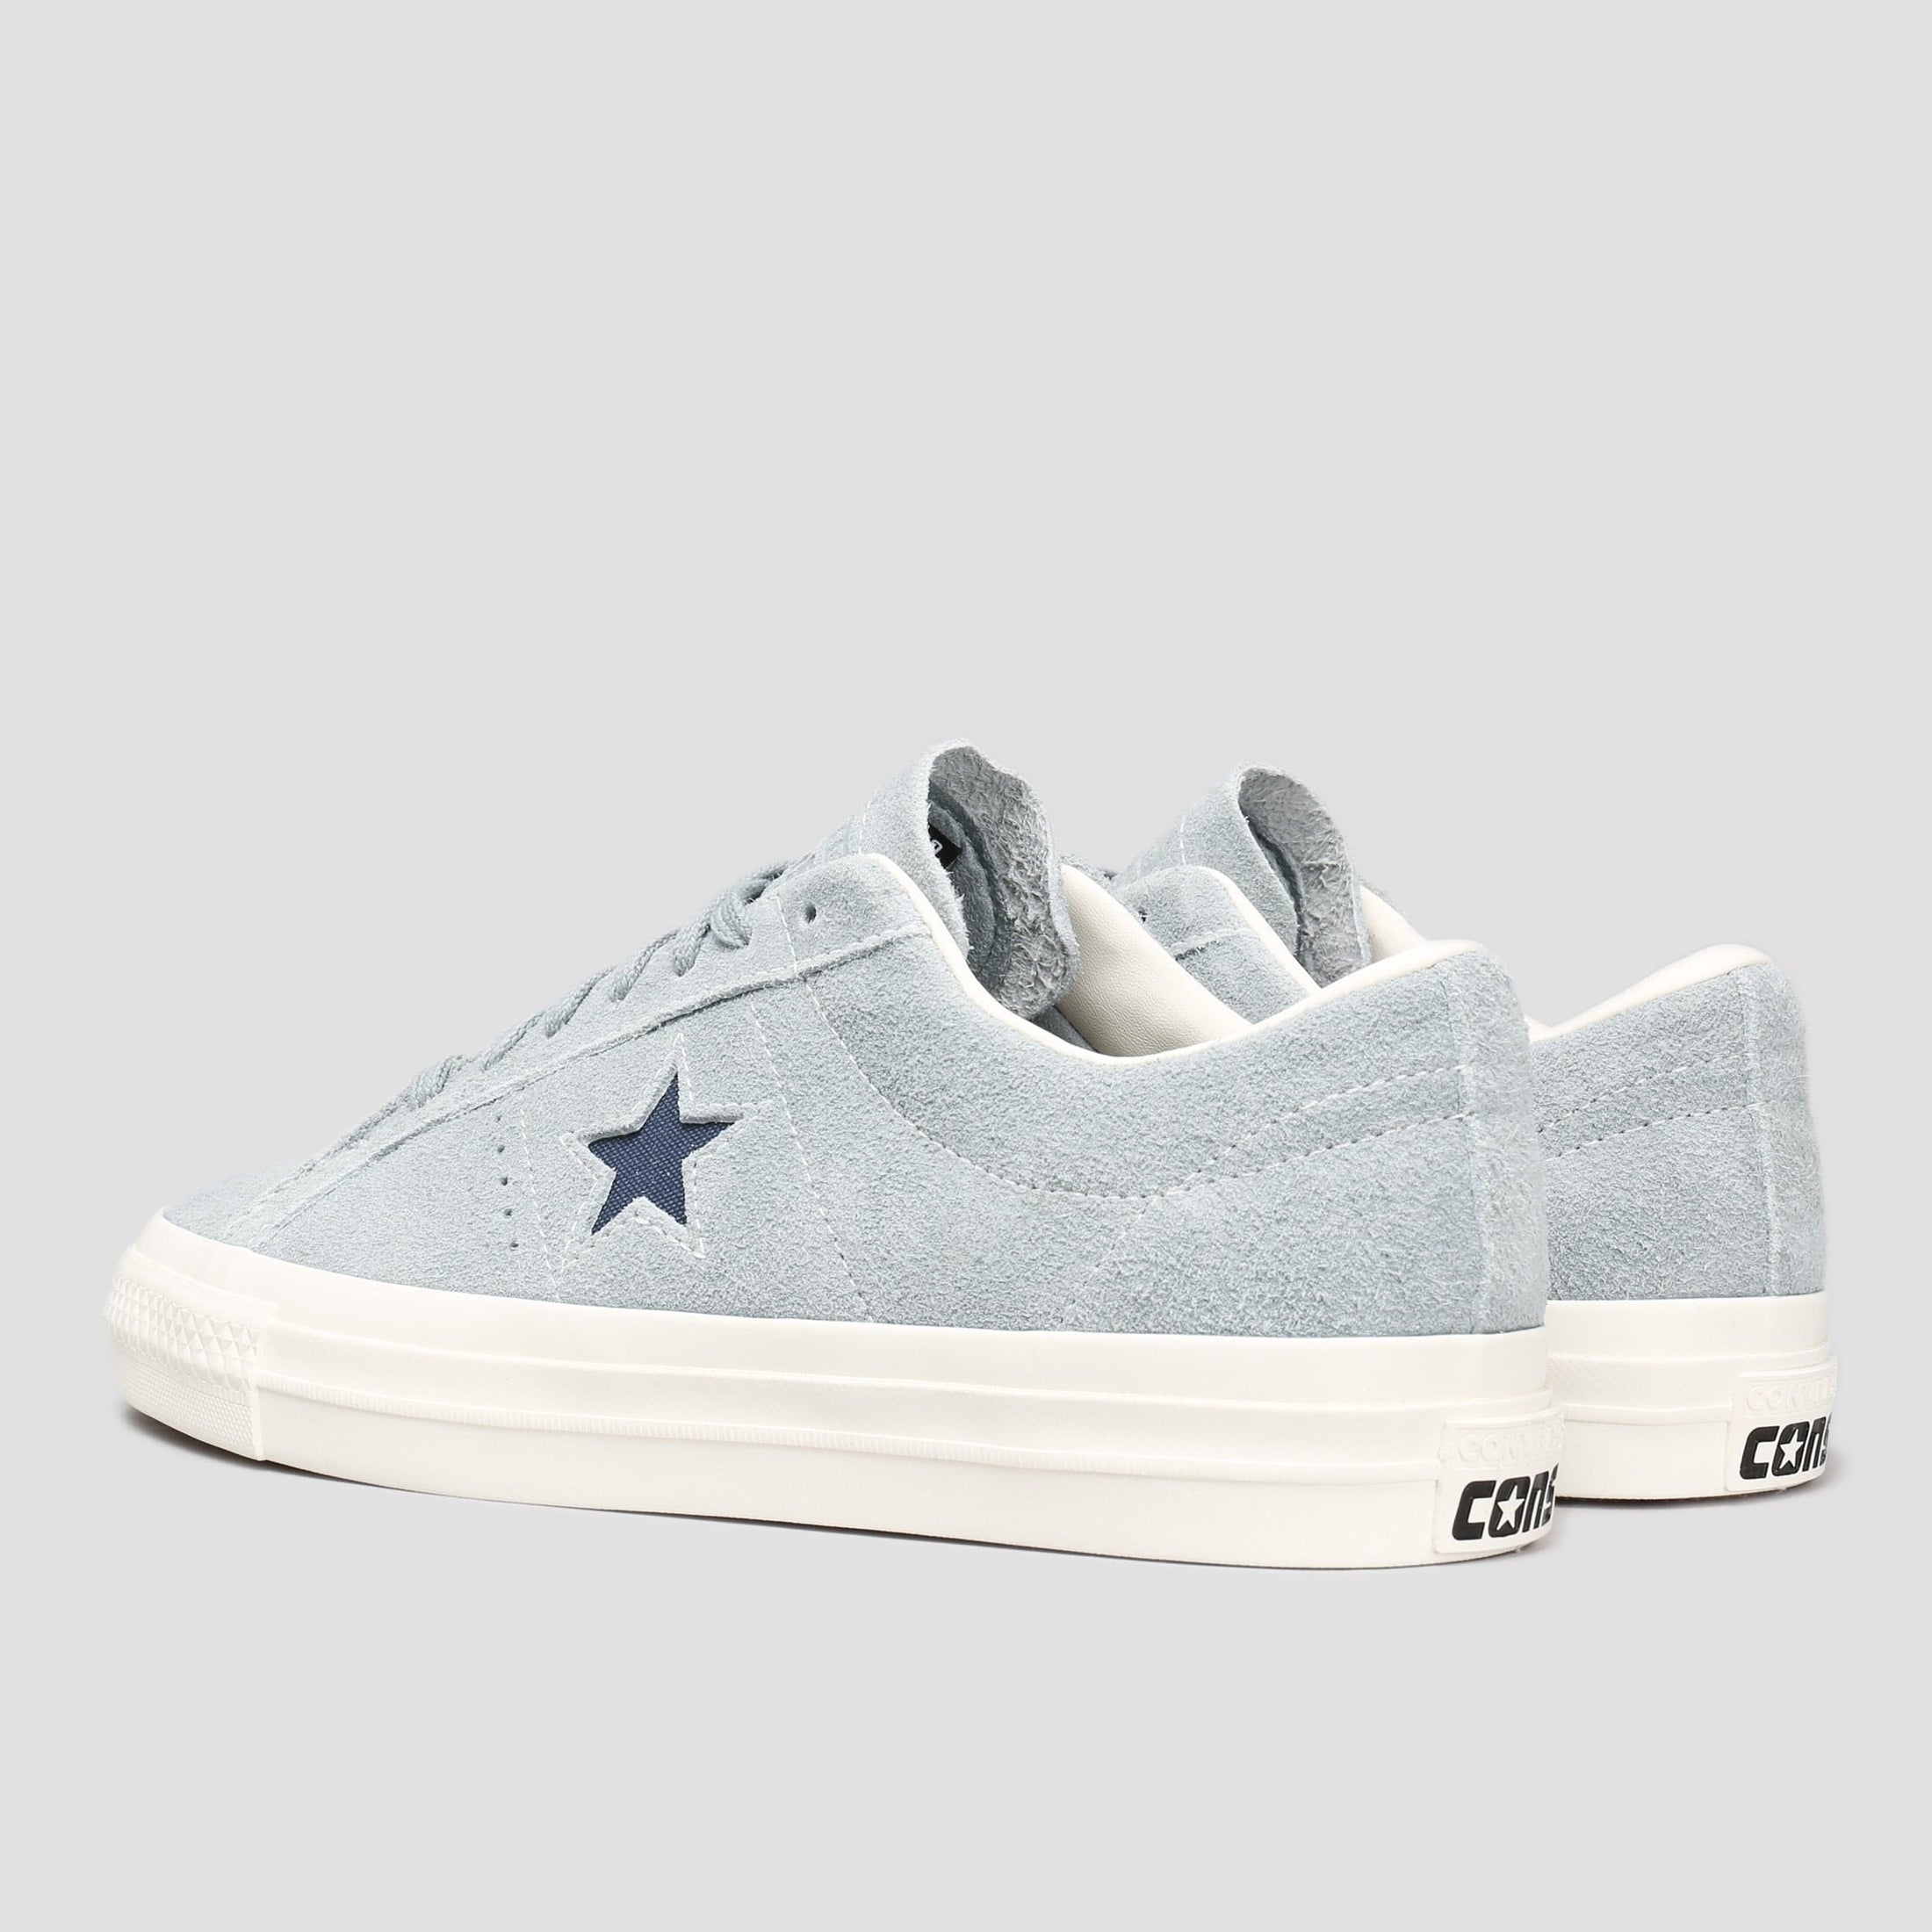 Converse One Star Pro OX Shoes Tidepool Grey / Navy / Egret